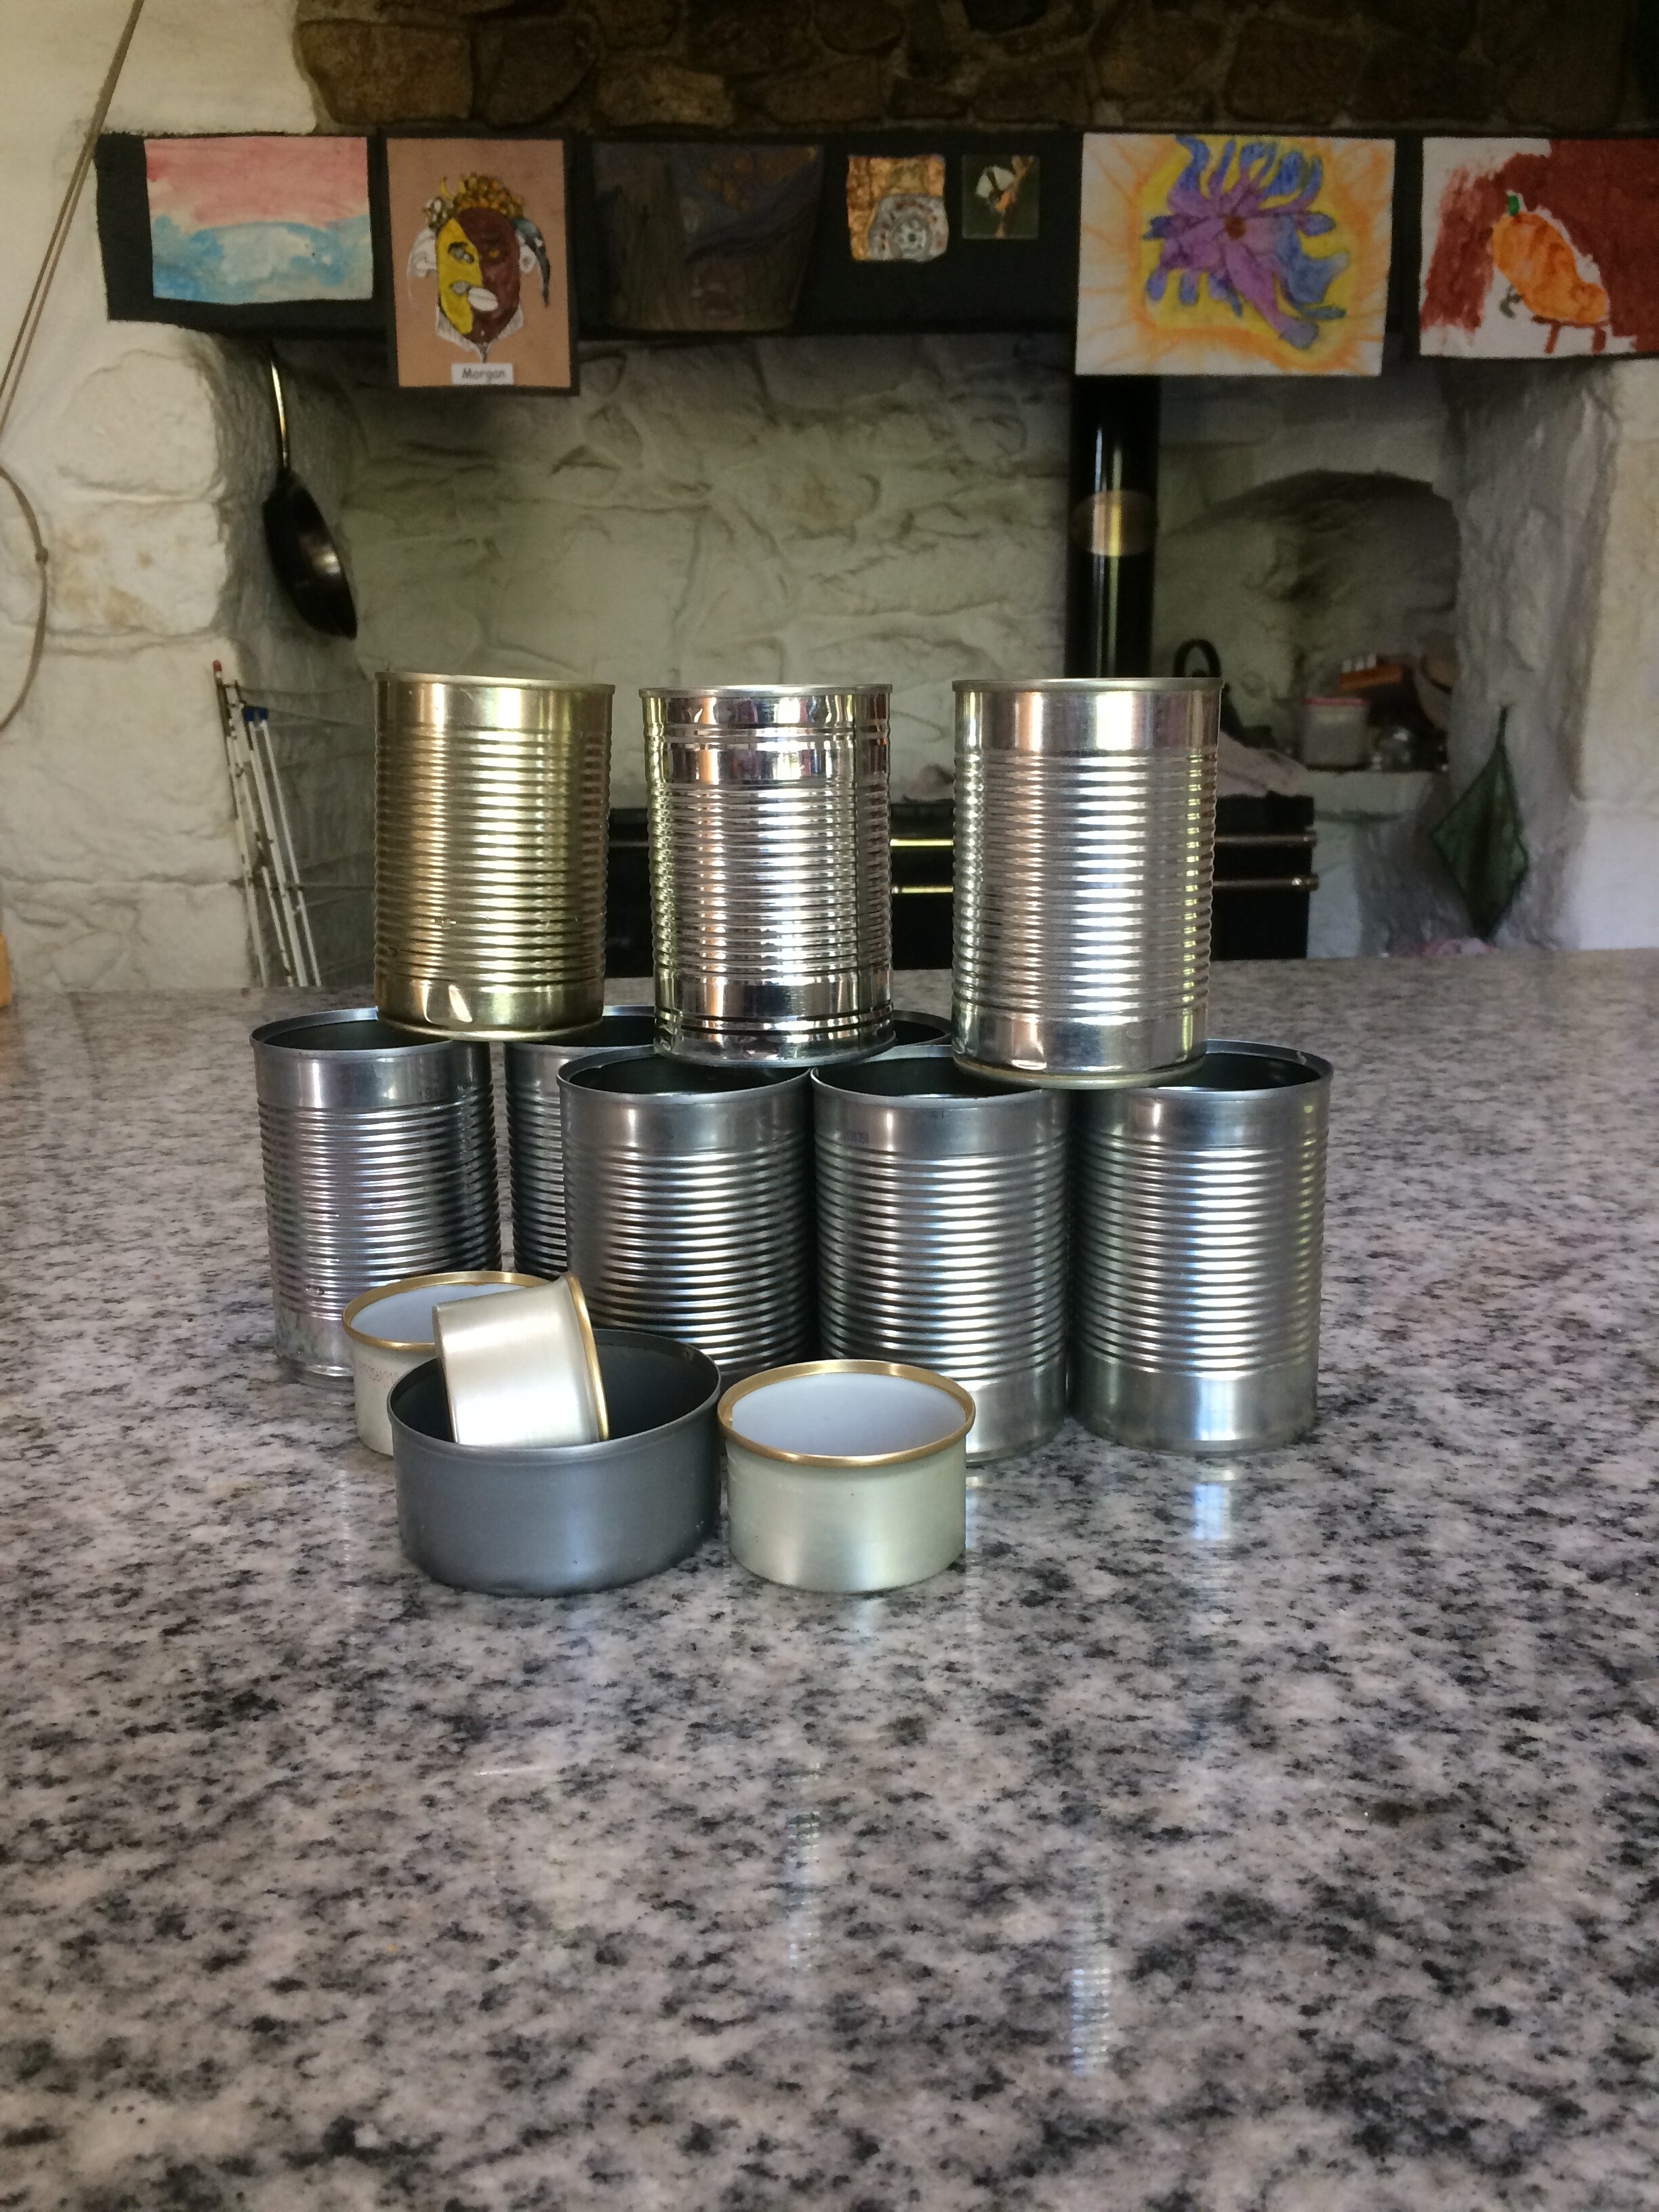 What Are Tin Cans Made Of?